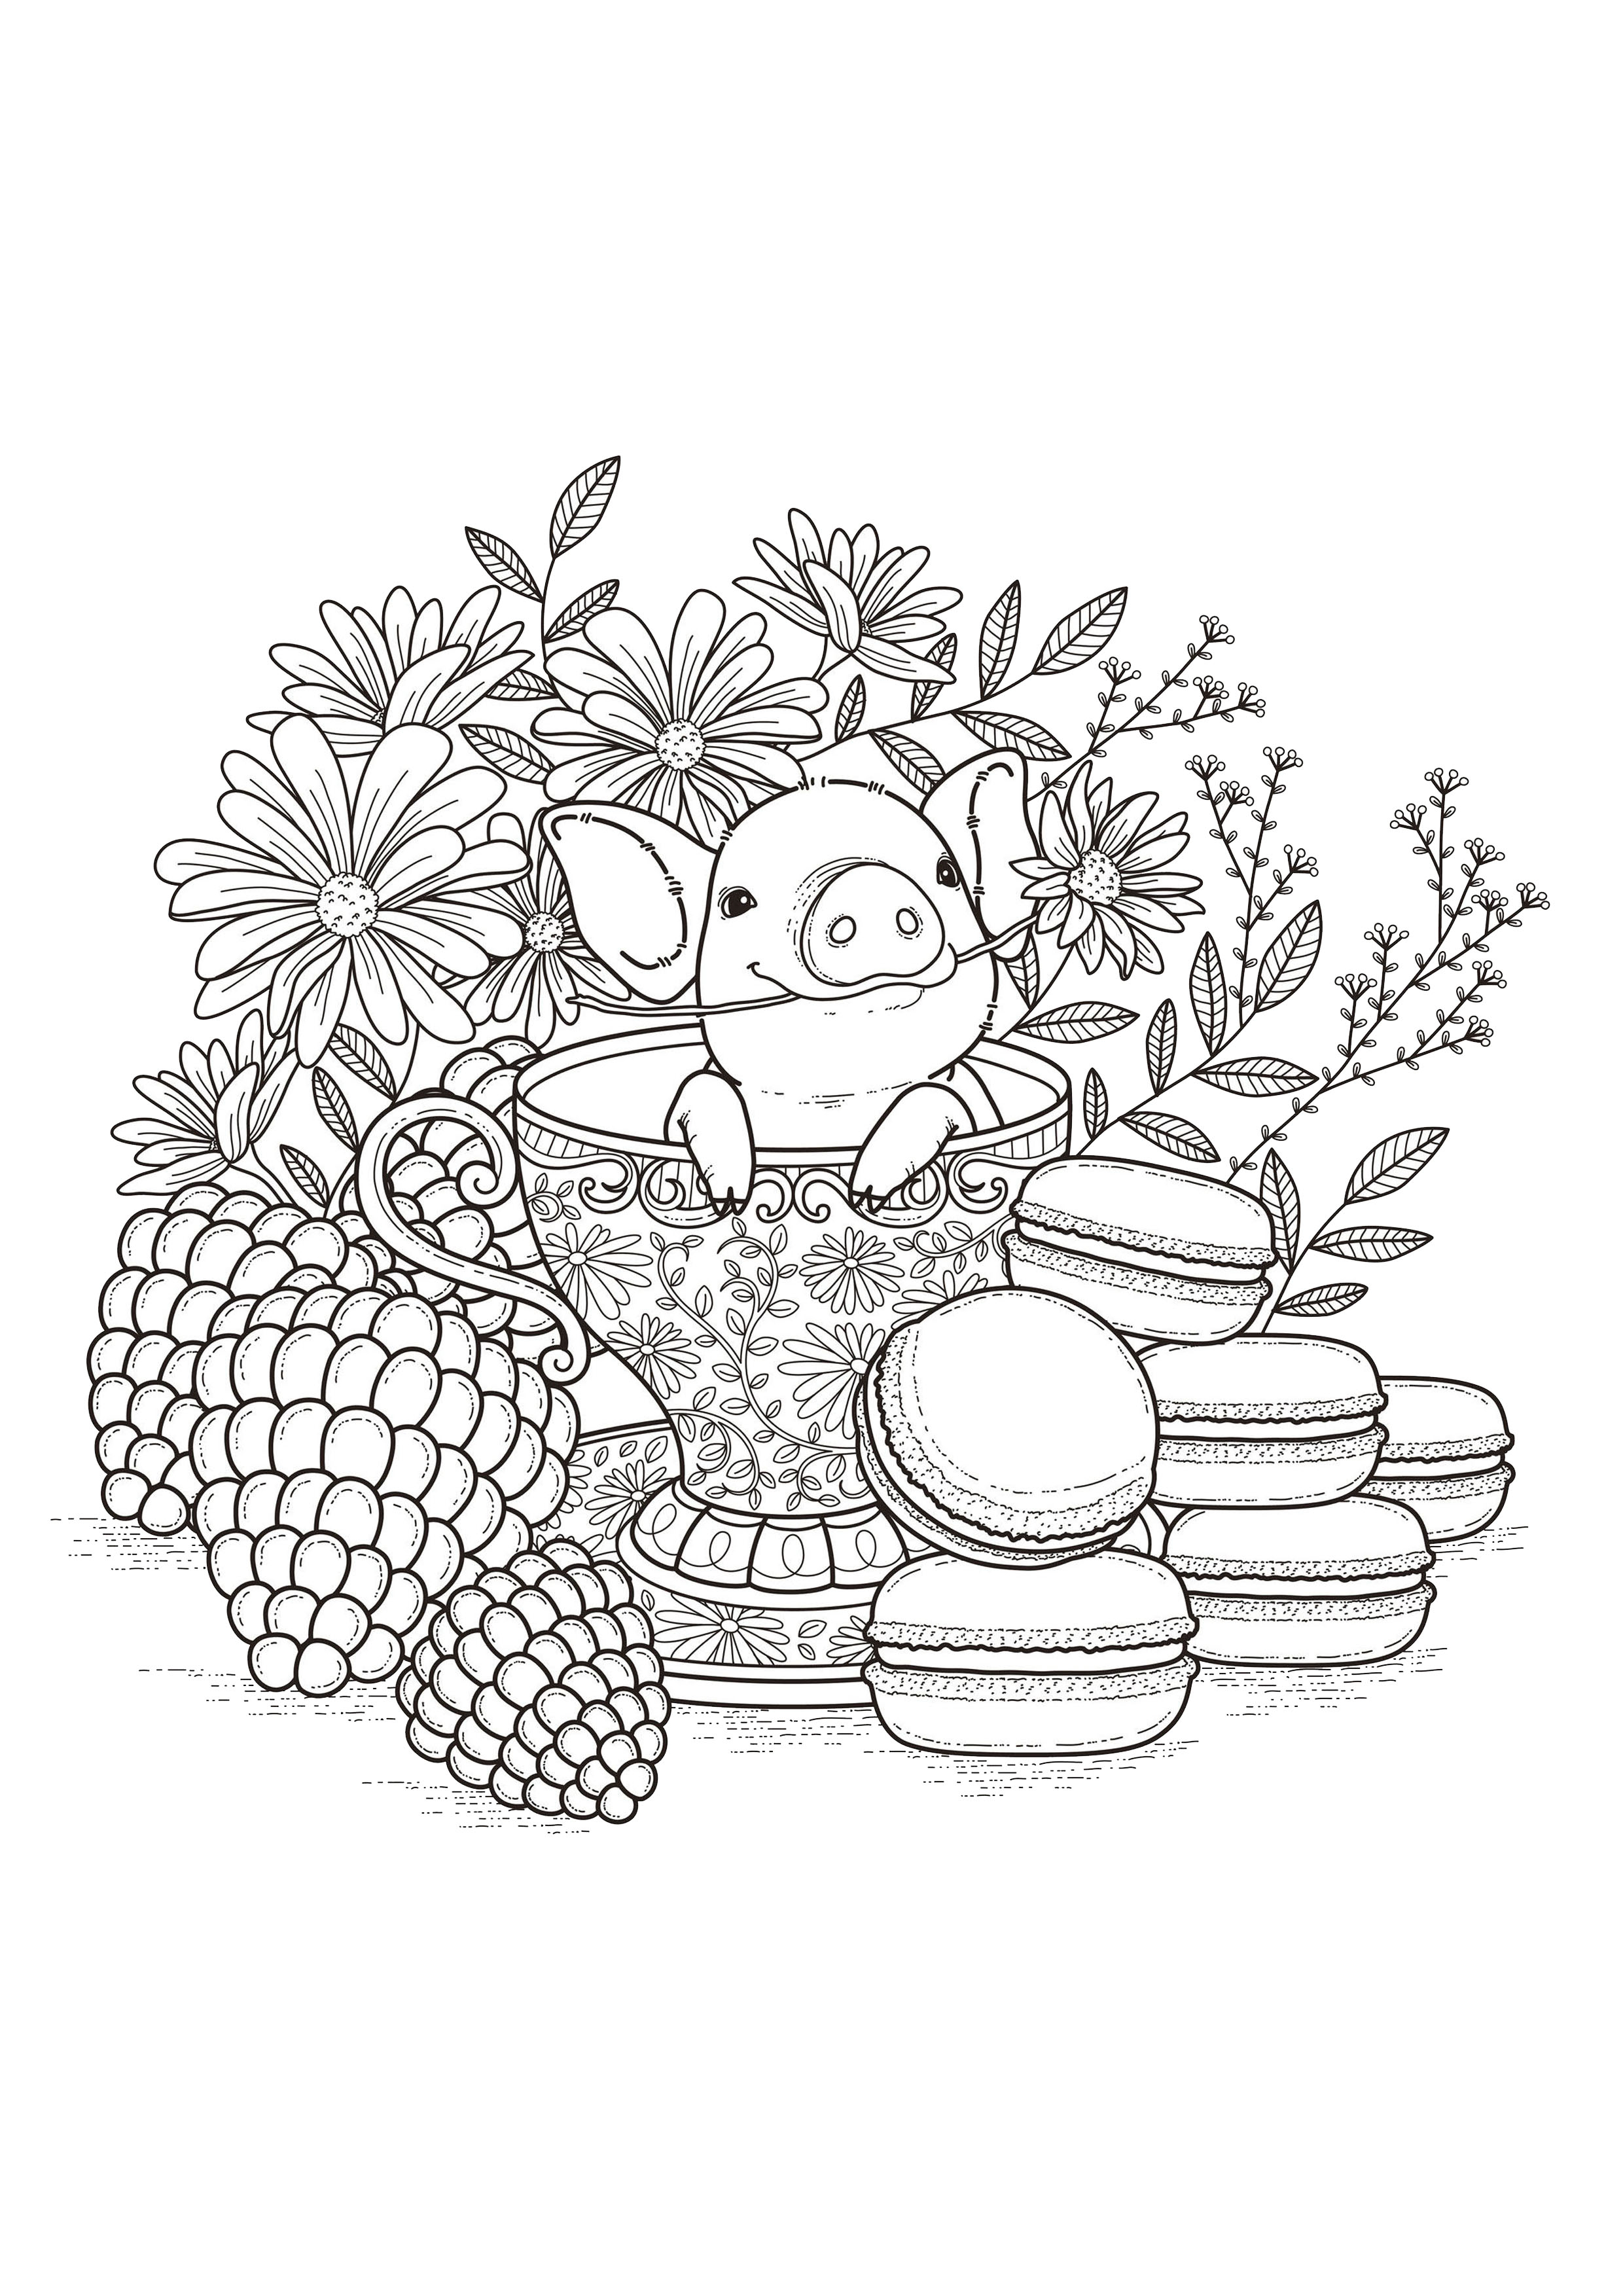 Adult Coloring Pages Ba Pork Pigs Adult Coloring Pages